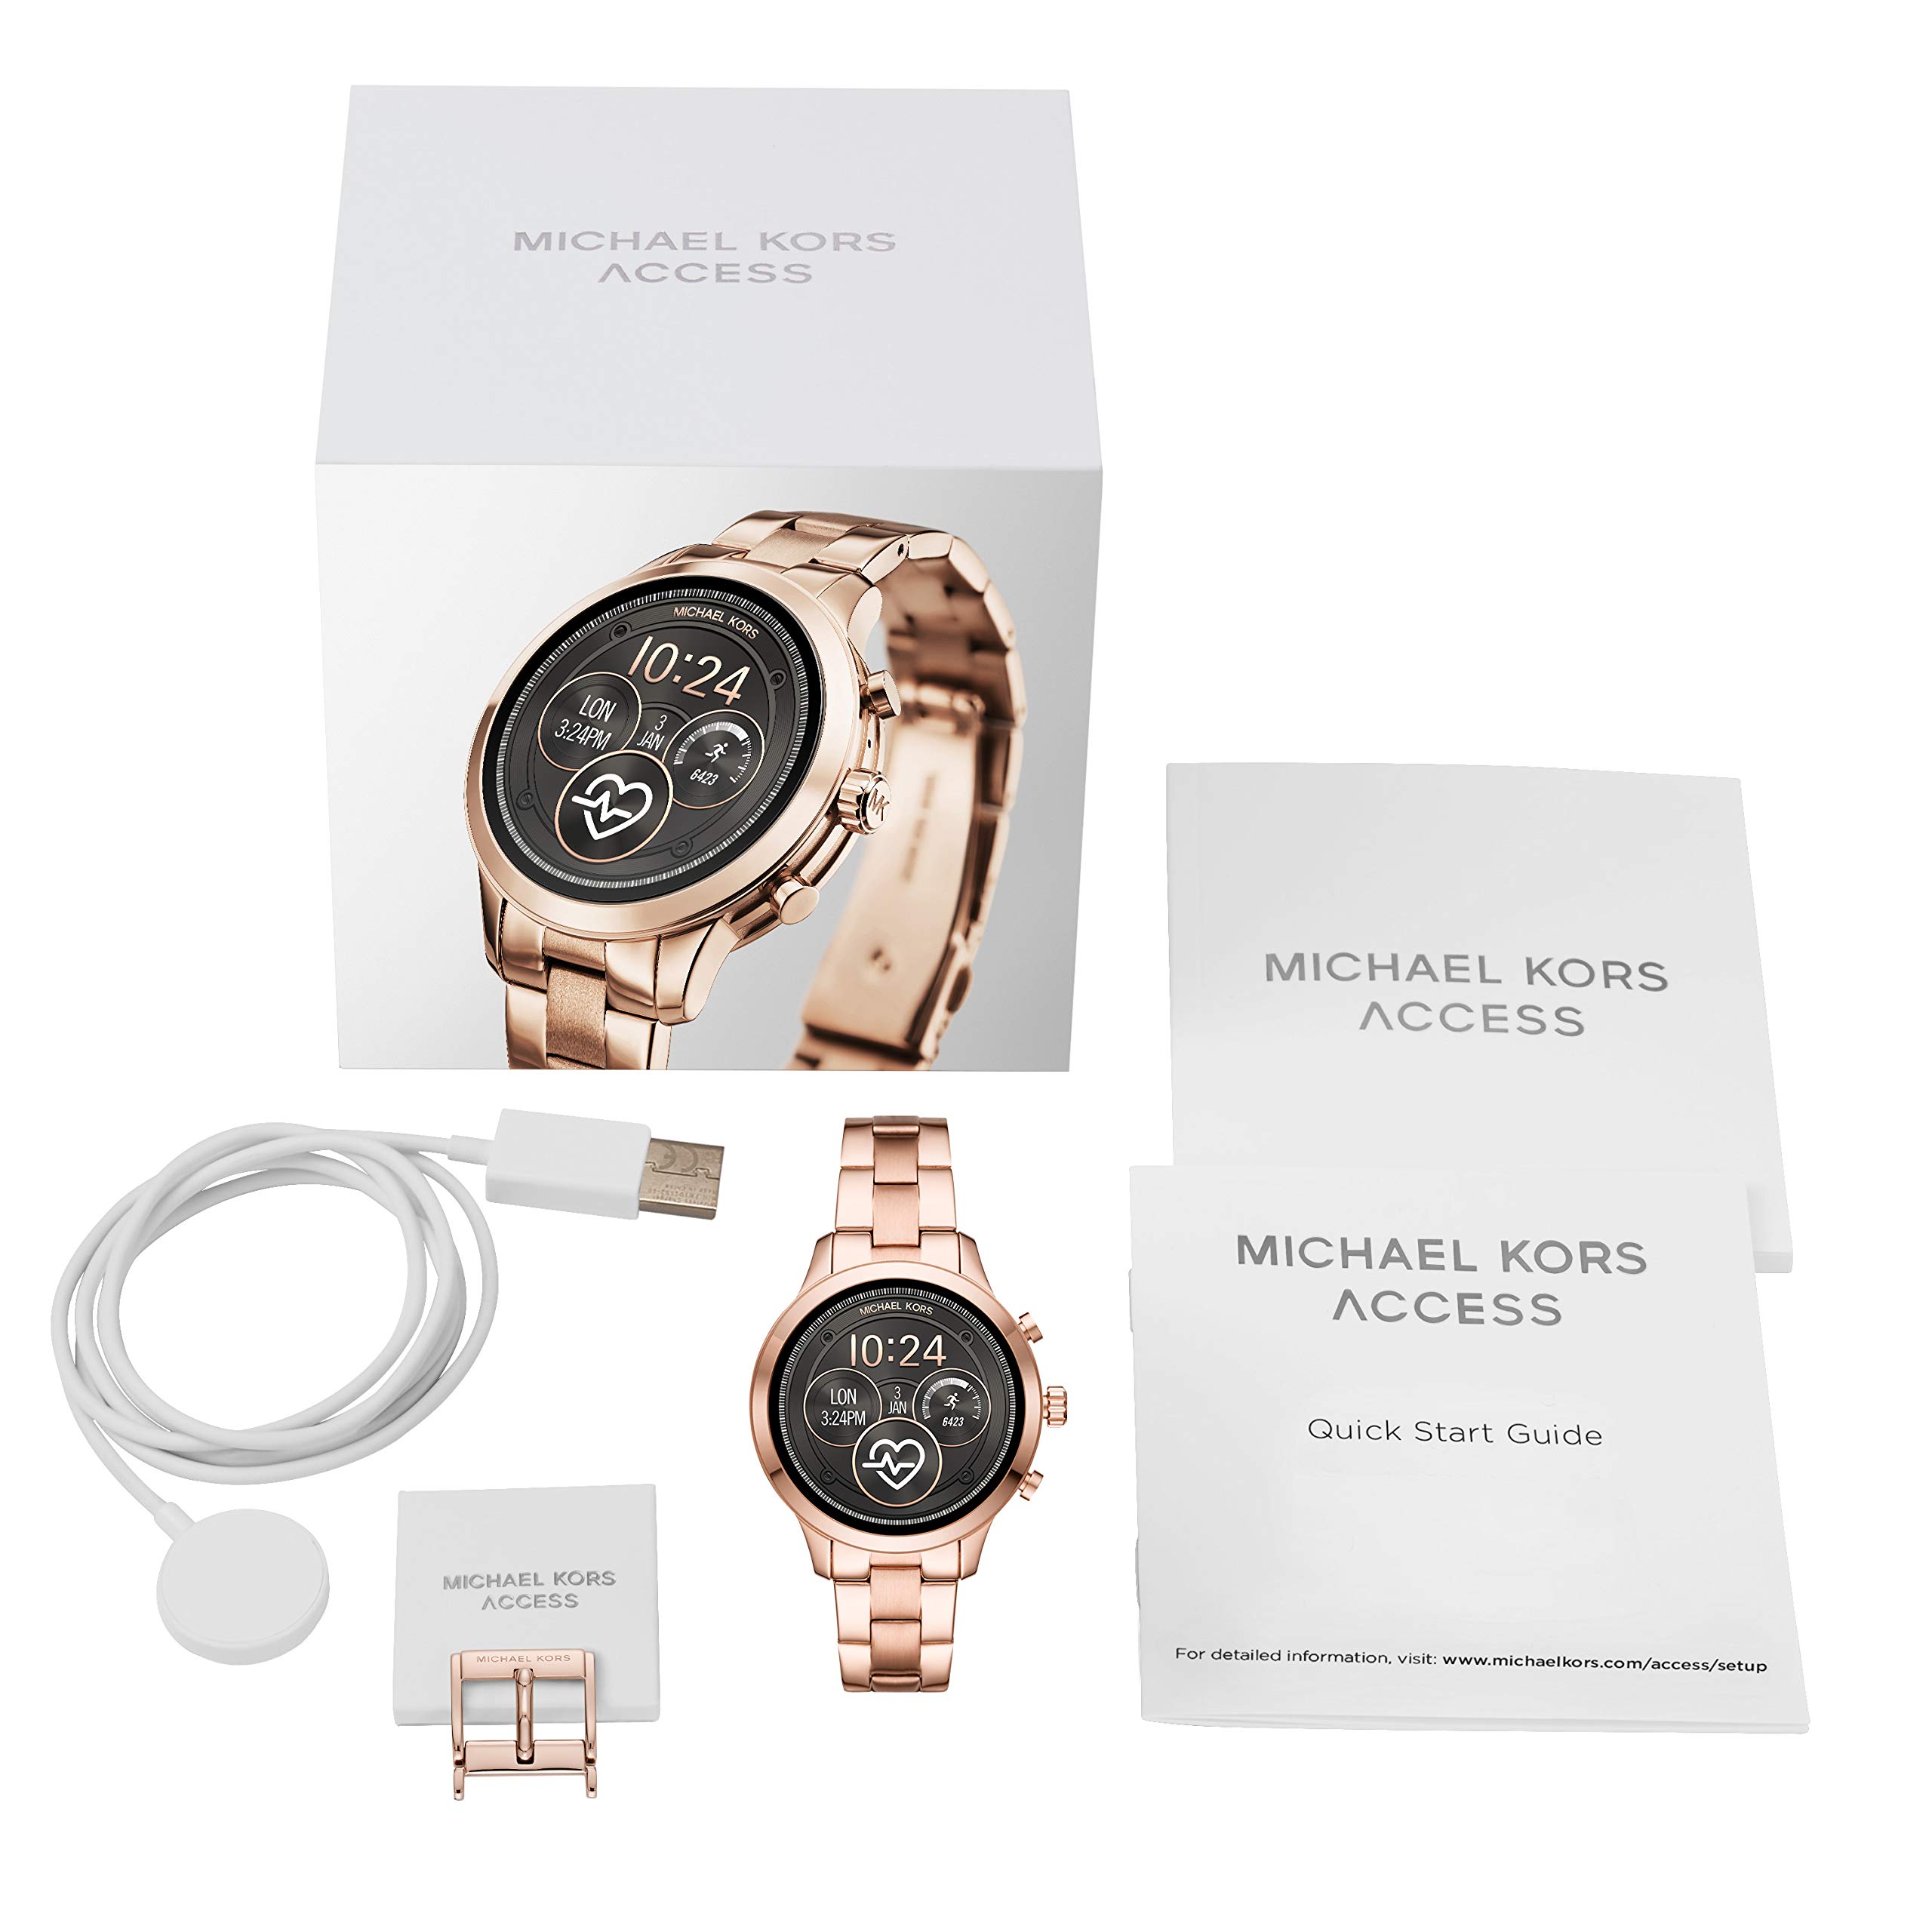 Amazoncom Michael Kors Womens Access Gen 4 Runway Stainless Steel Plated  Touchscreen Watch with Strap RoseGoldTone 18 Model MKT5046 Rose Gold  ToneStainless Steel Bracelet  Electronics